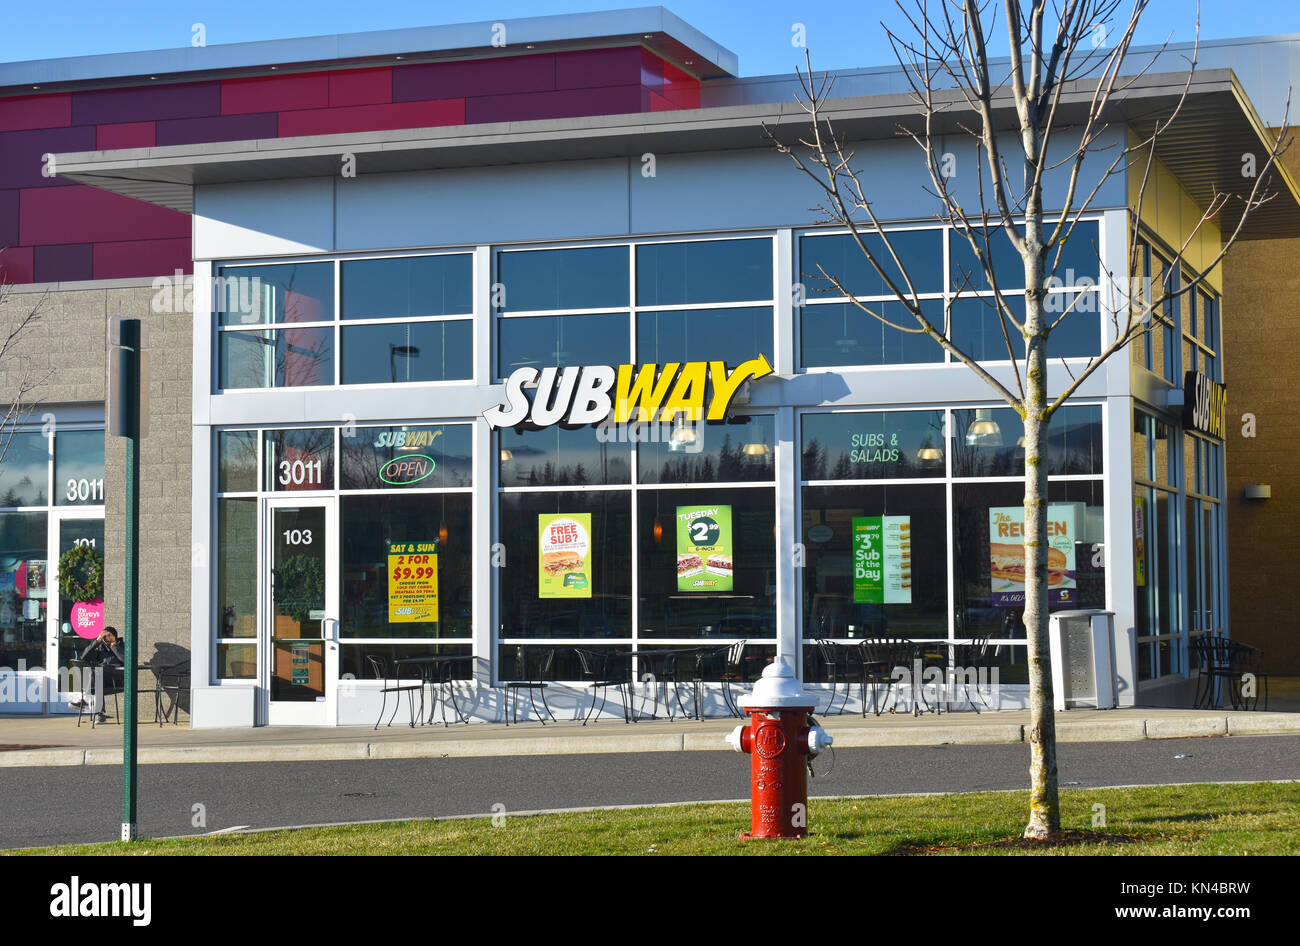 A Subway fast food restaurant in Barkley Village, Bellingham, Washington, USA.  Subway sells sub sandwhiches with many toppings. Stock Photo